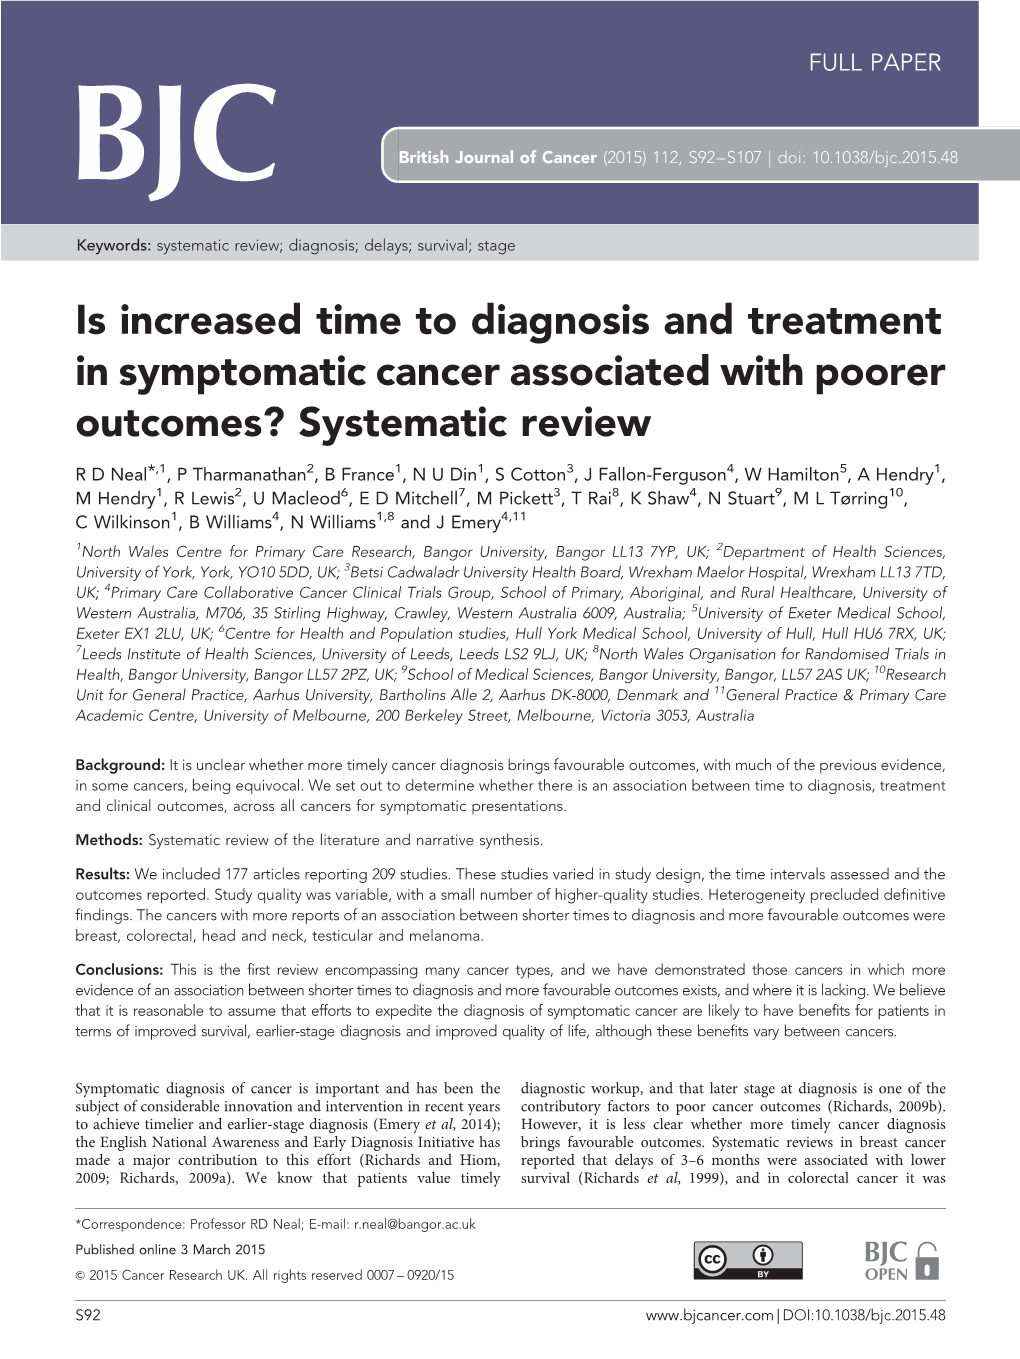 Is Increased Time to Diagnosis and Treatment in Symptomatic Cancer Associated with Poorer Outcomes&Quest; Systematic Review